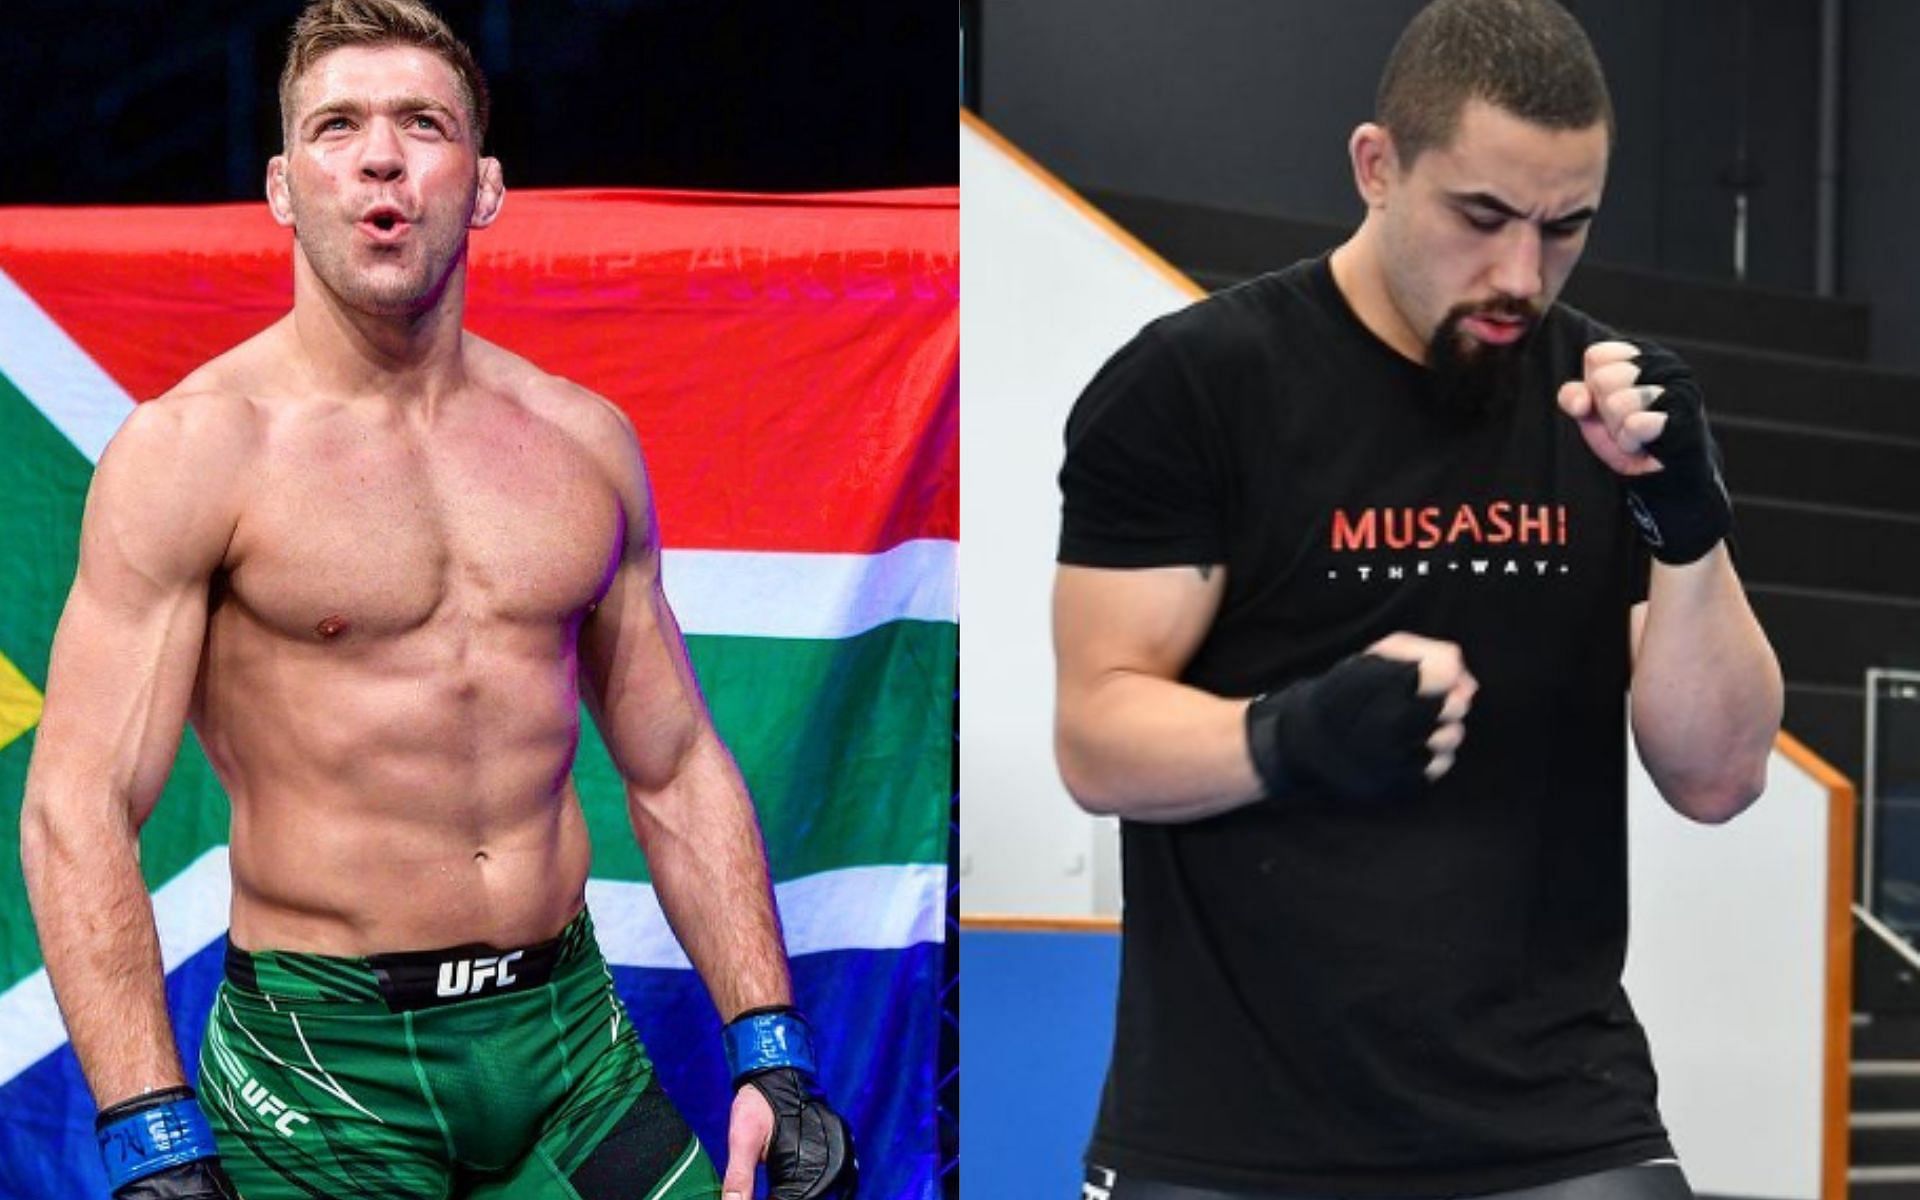 Dricus du Plessis on the left, Robert Whittaker on the right [Image source @dricusduplessis and @robwhittakermma on Instagram]